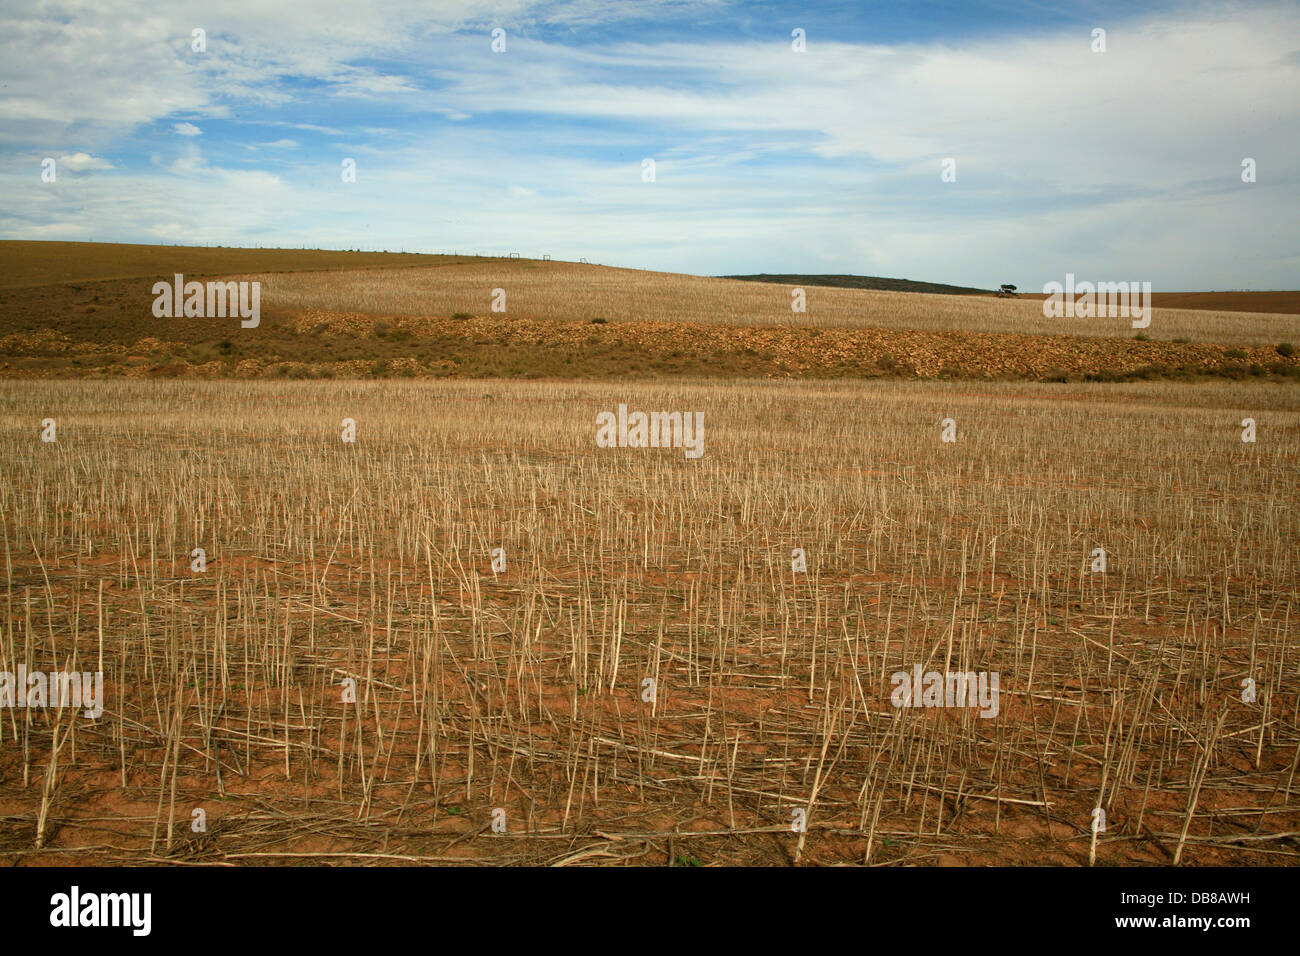 wheat field in Overberg, South Africa, Stock Photo